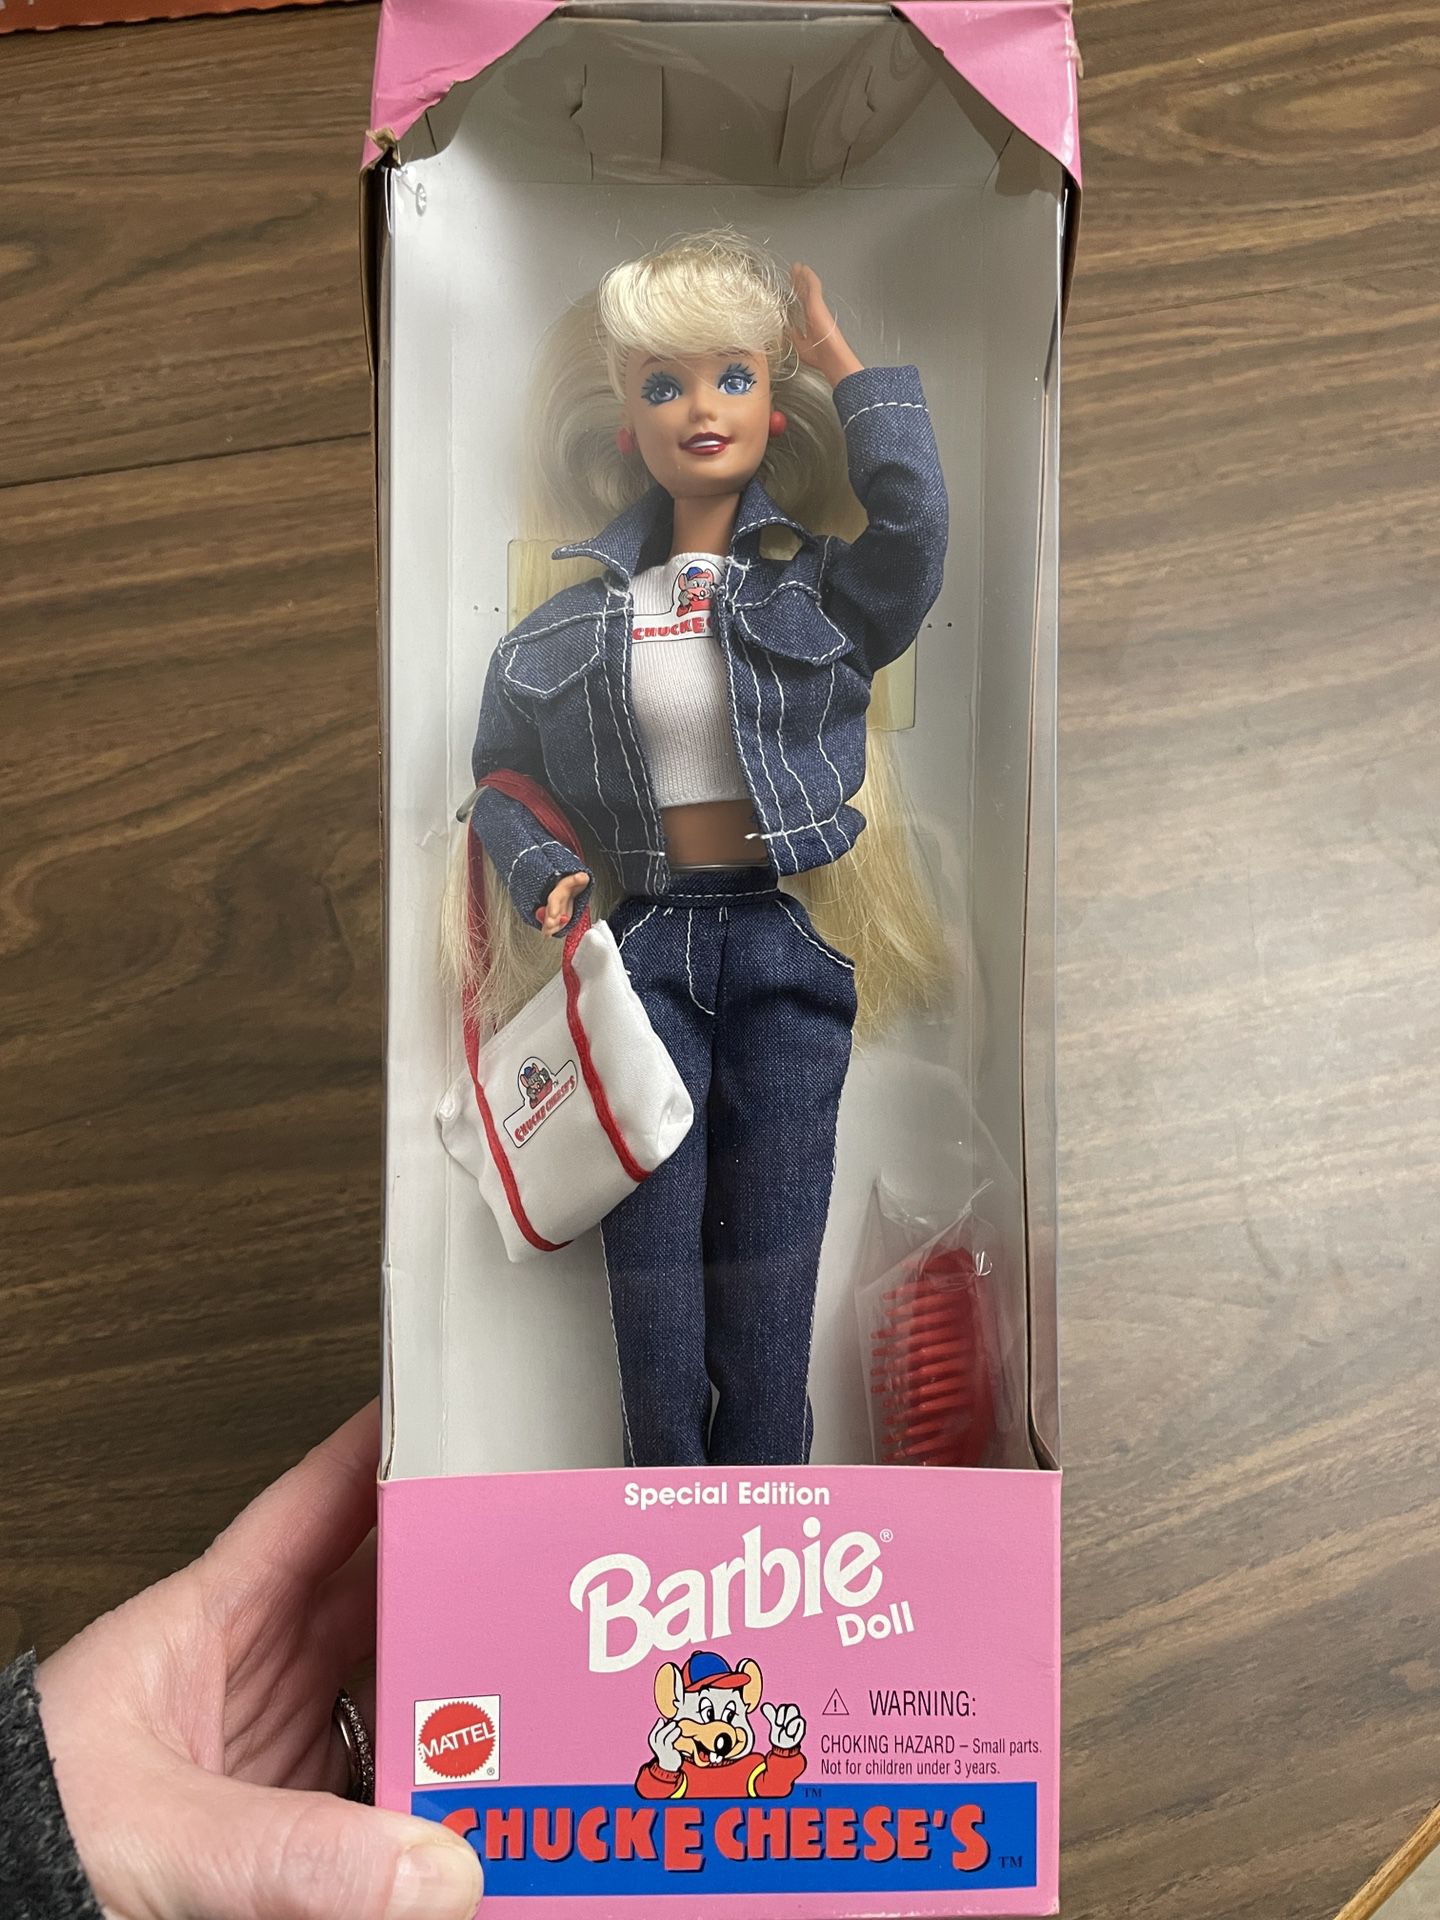 Vintage 1995 Special Edition Chuck E. Cheese’s Barbie